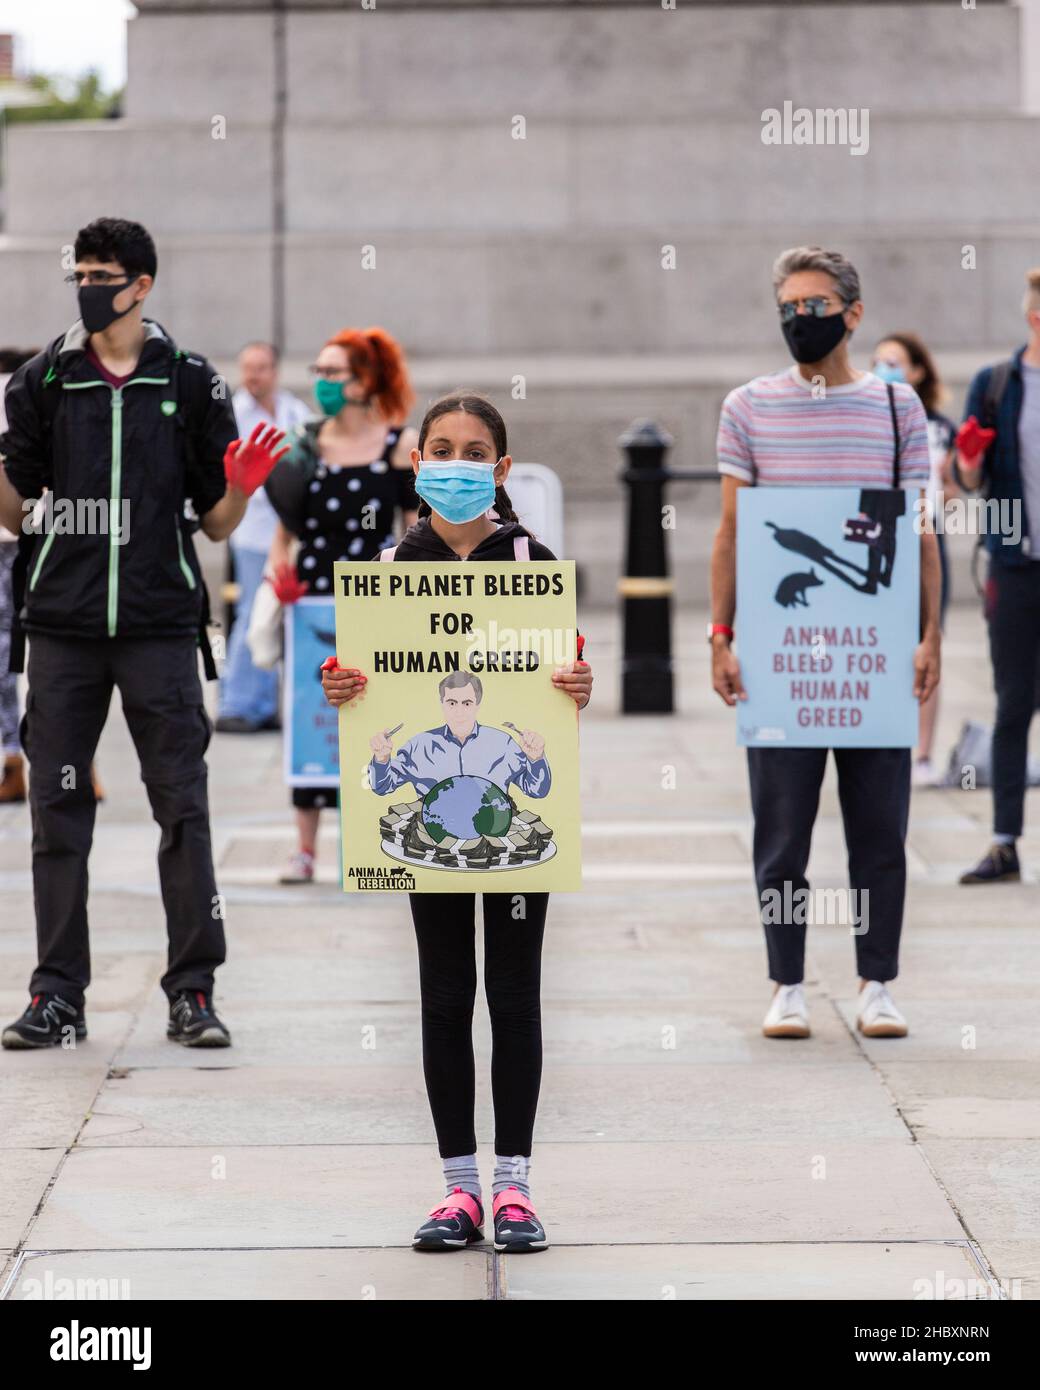 animal rebellion child protestor standing in trafalgar square holding placard The planet bleeds for human greed London 2020 Stock Photo